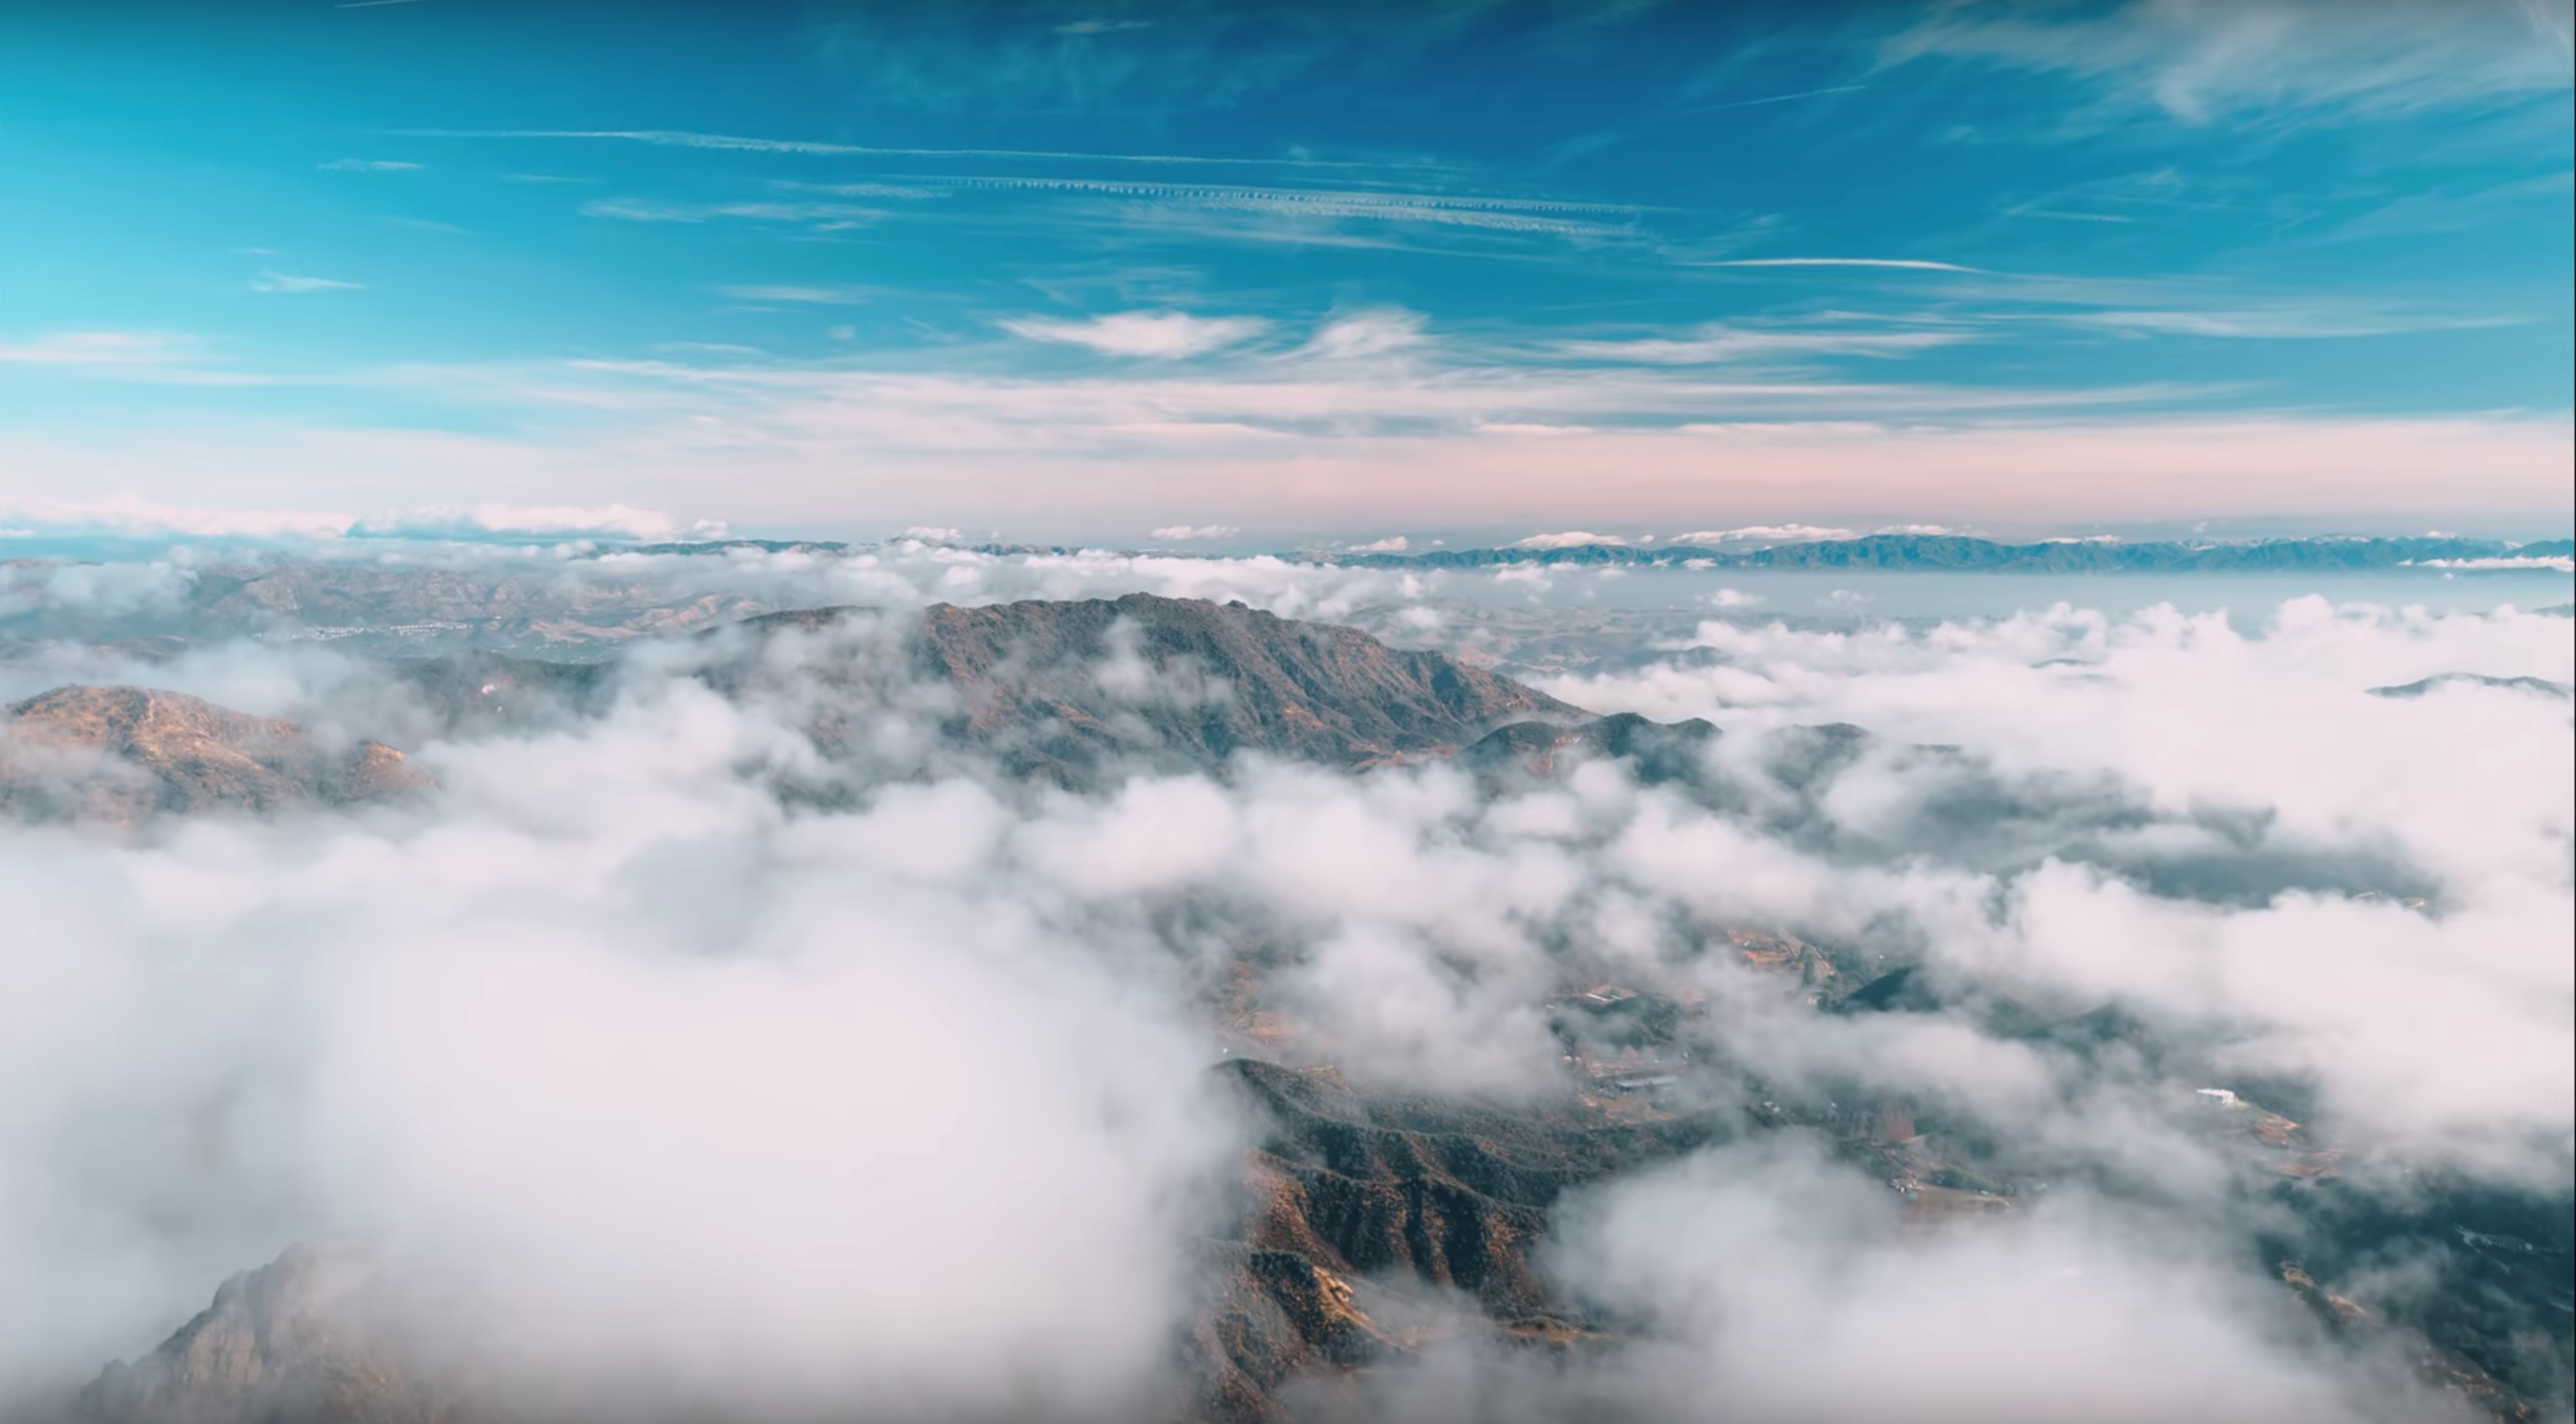 Watch: 3 Tips on Shooting More Cinematic Drone Footage